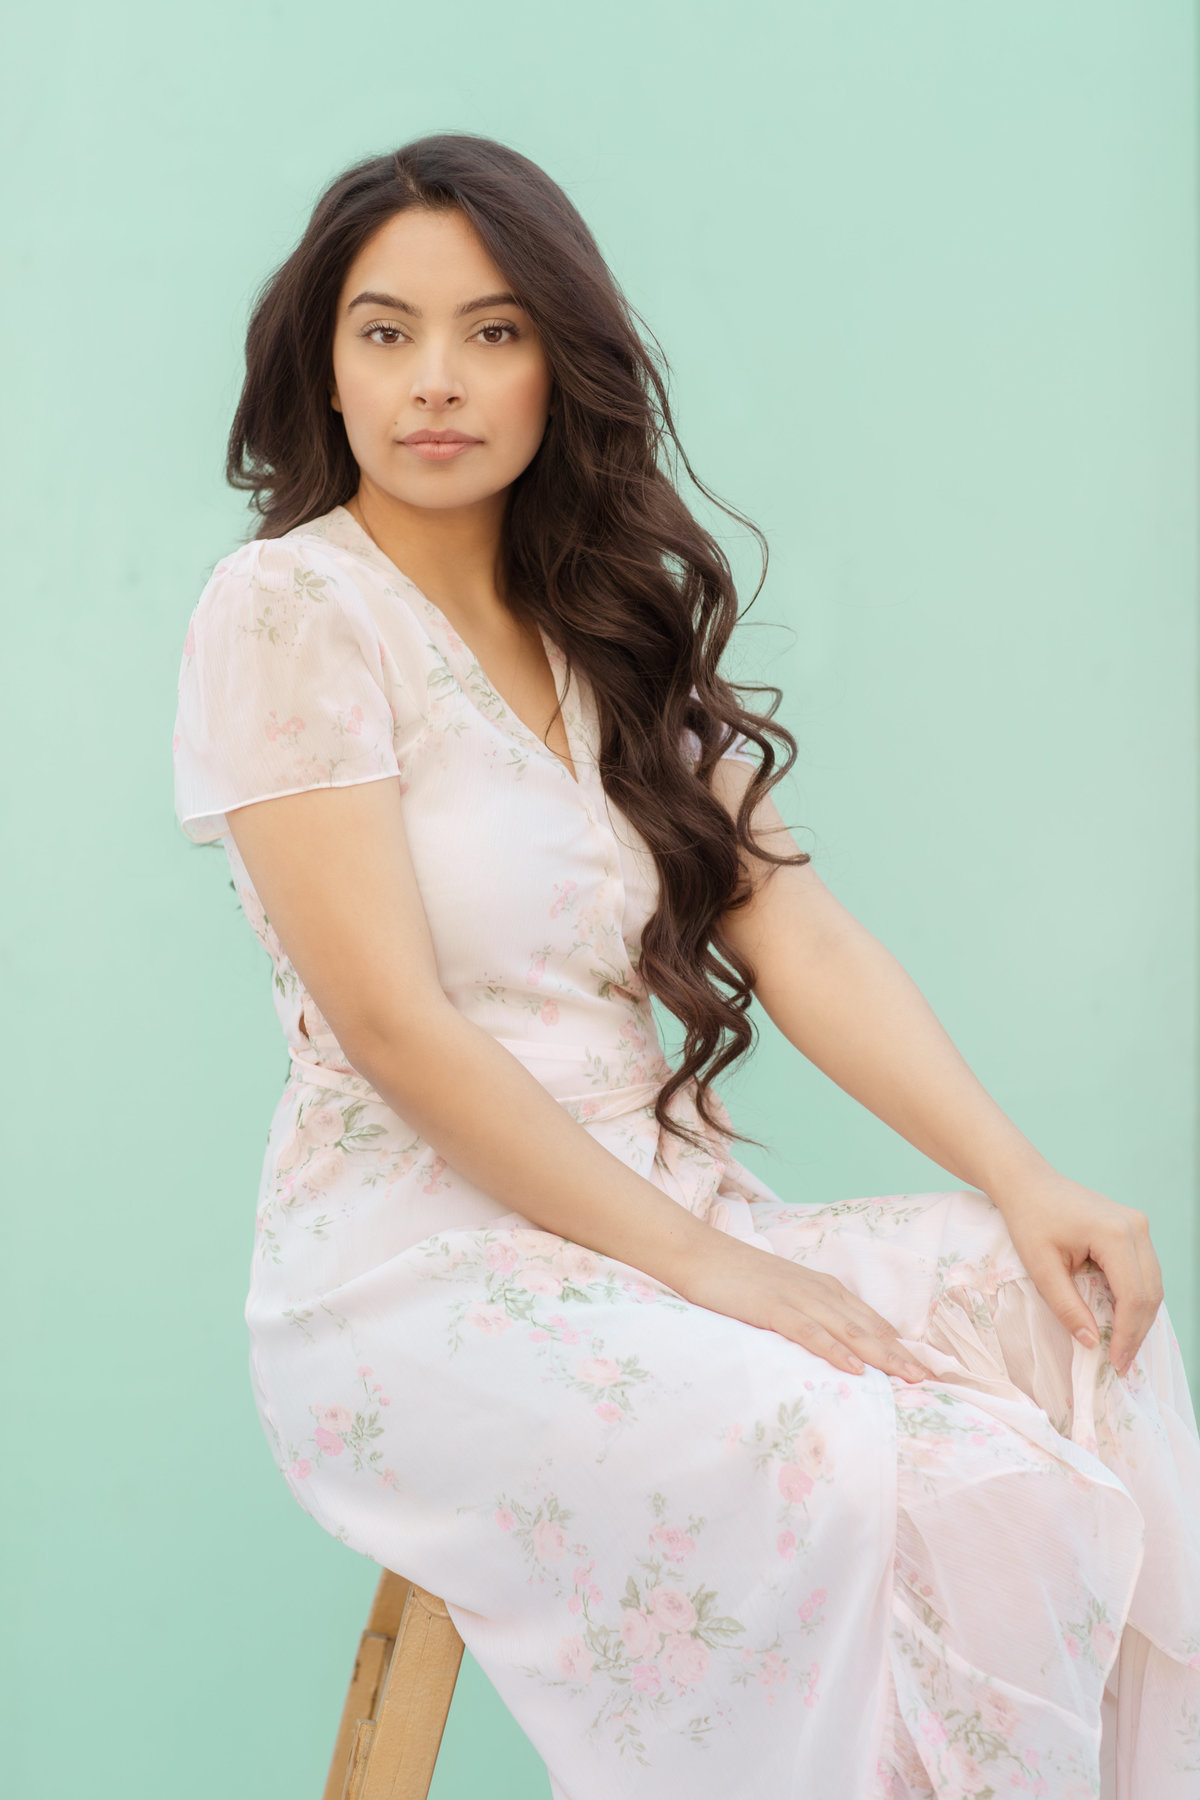 Portrait Photo Of Young Woman In White Dress Holding Her Knee Los Angeles